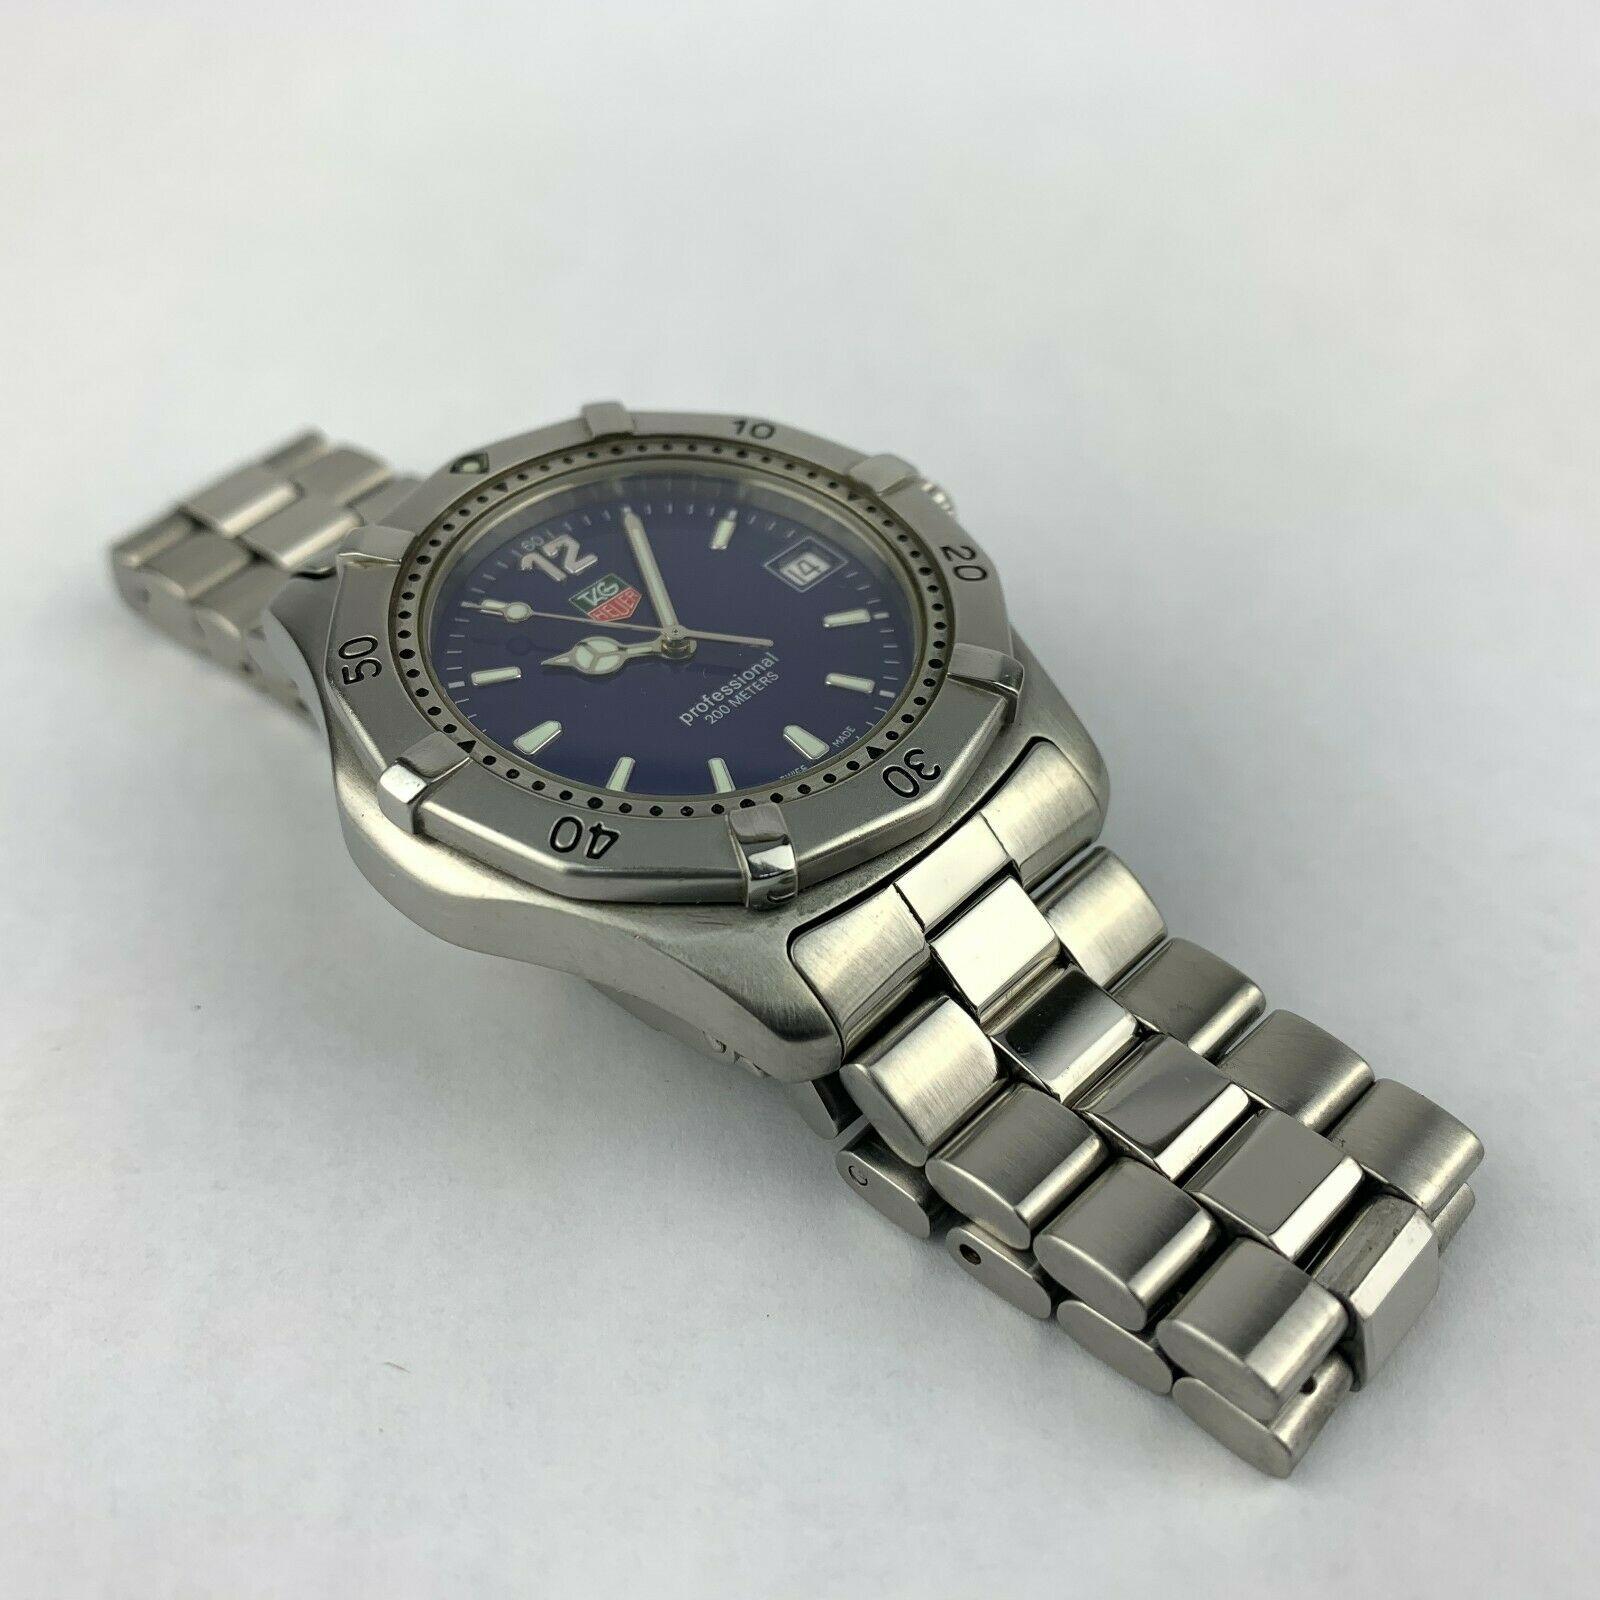 TAG Heuer Professional Quartz WK1113-0 Blue Dial | Barry's Pawn and Jewelry